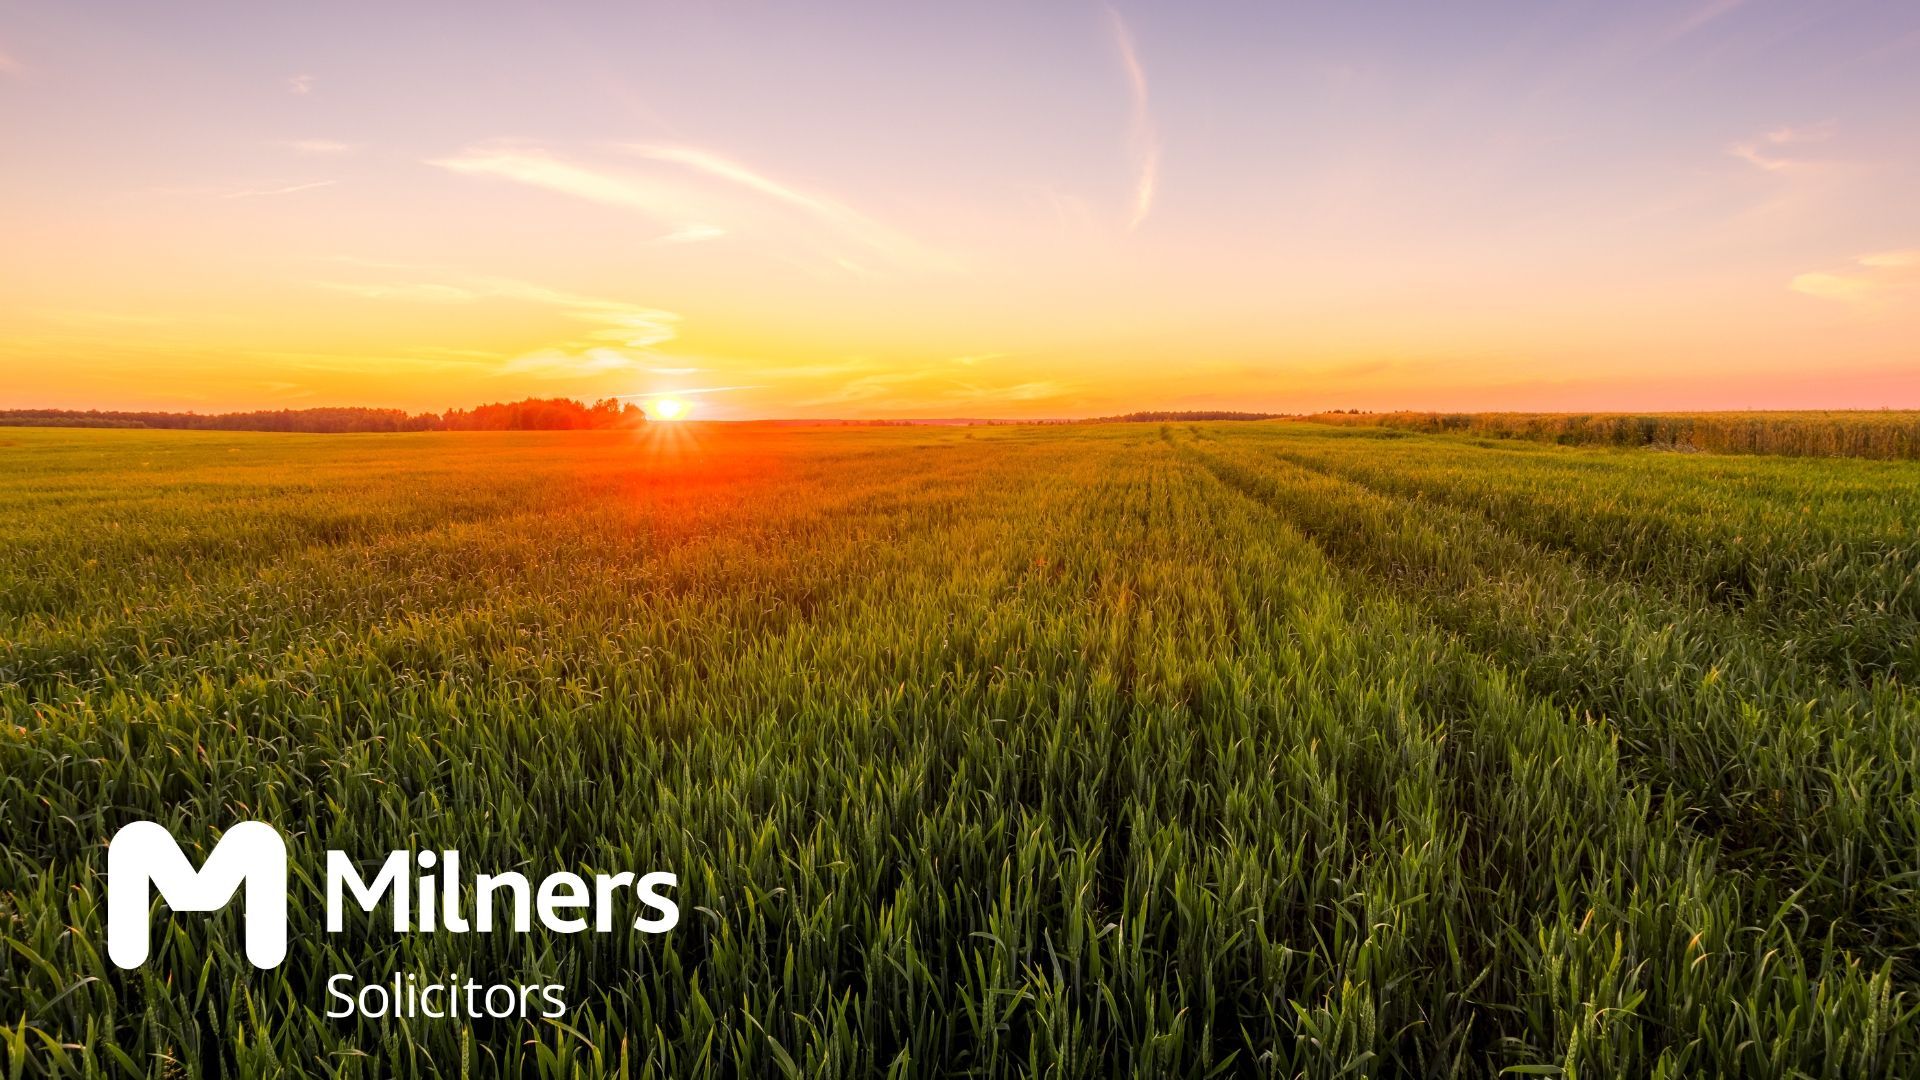 Compulsory purchase orders allow local authorities and other bodies to buy land without seeking the owner's consent. Find out how this can affect farmers.